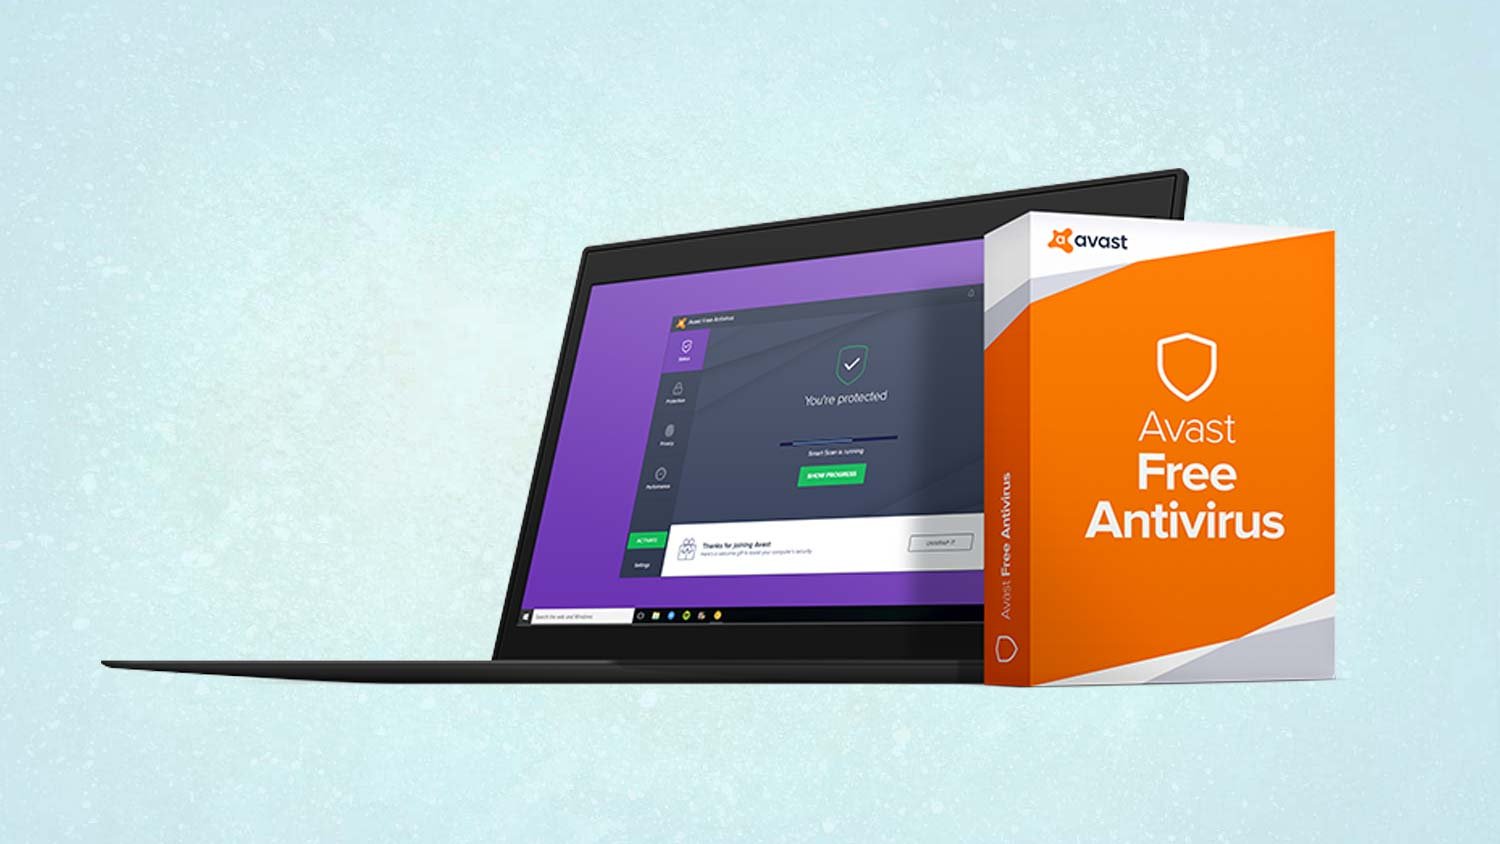 List of Top features associated with the Avast Antivirus